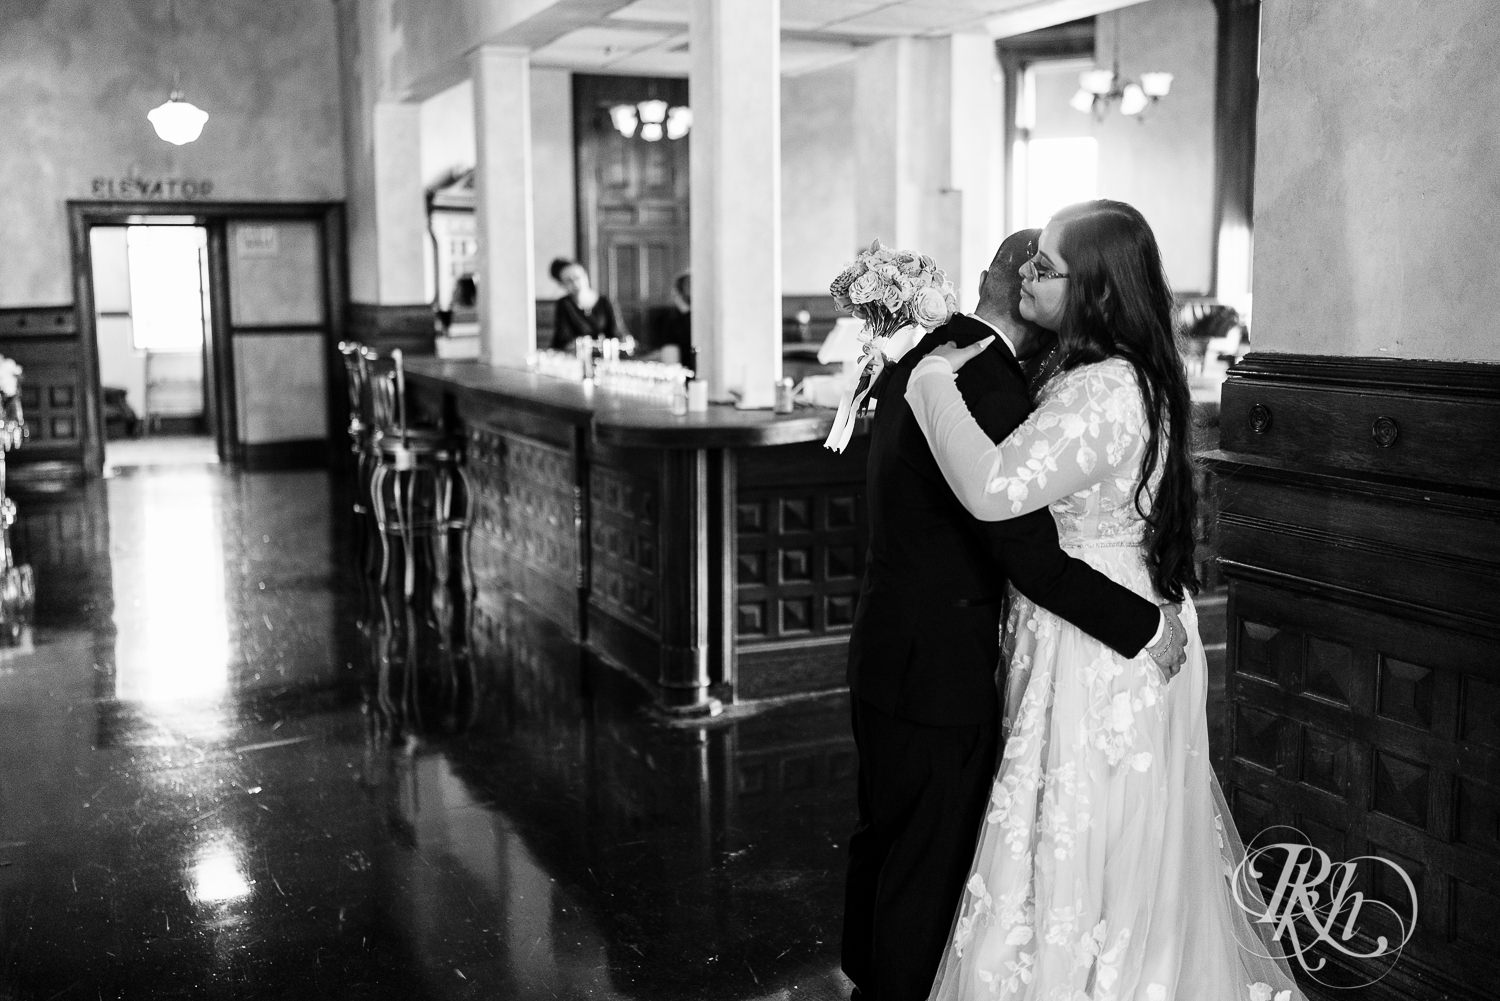 Bride and groom hug after wedding ceremony at the Historic Concord Exchange in Saint Paul, Minnesota.